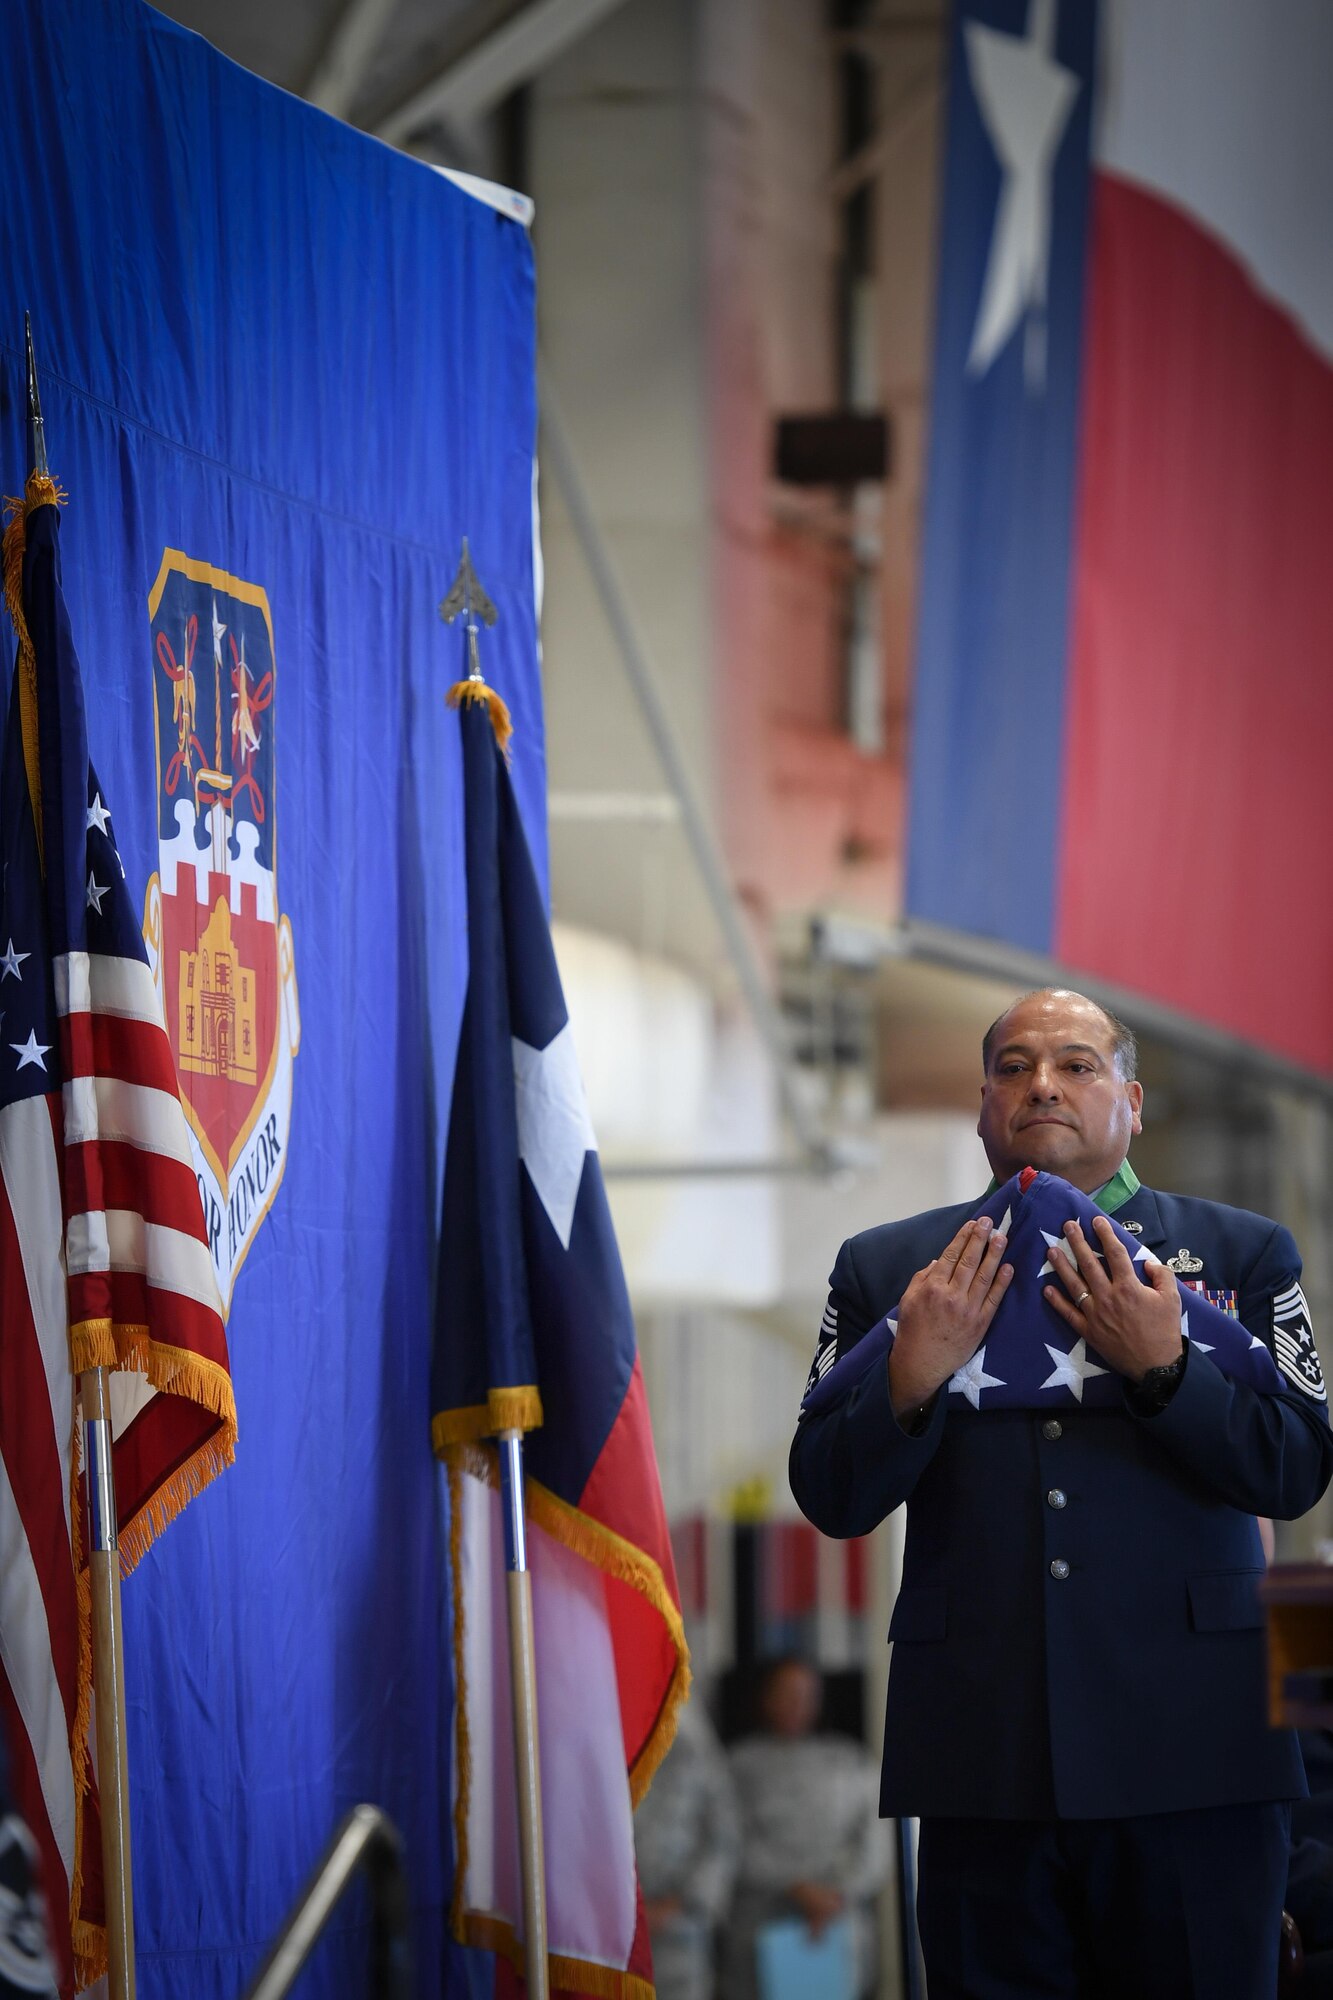 Command Chief Master Sgt. George Longoria holds an American flag during his retirement ceremony at Joint Base San Antonio-Lackland, Texas, Feb. 25, 2017. Longoria retires after 35 years of service with the 149th Fighter Wing, Texas Air National Guard. (U.S. Air National Guard photo by Tech. Sgt. Eric L. Wilson)